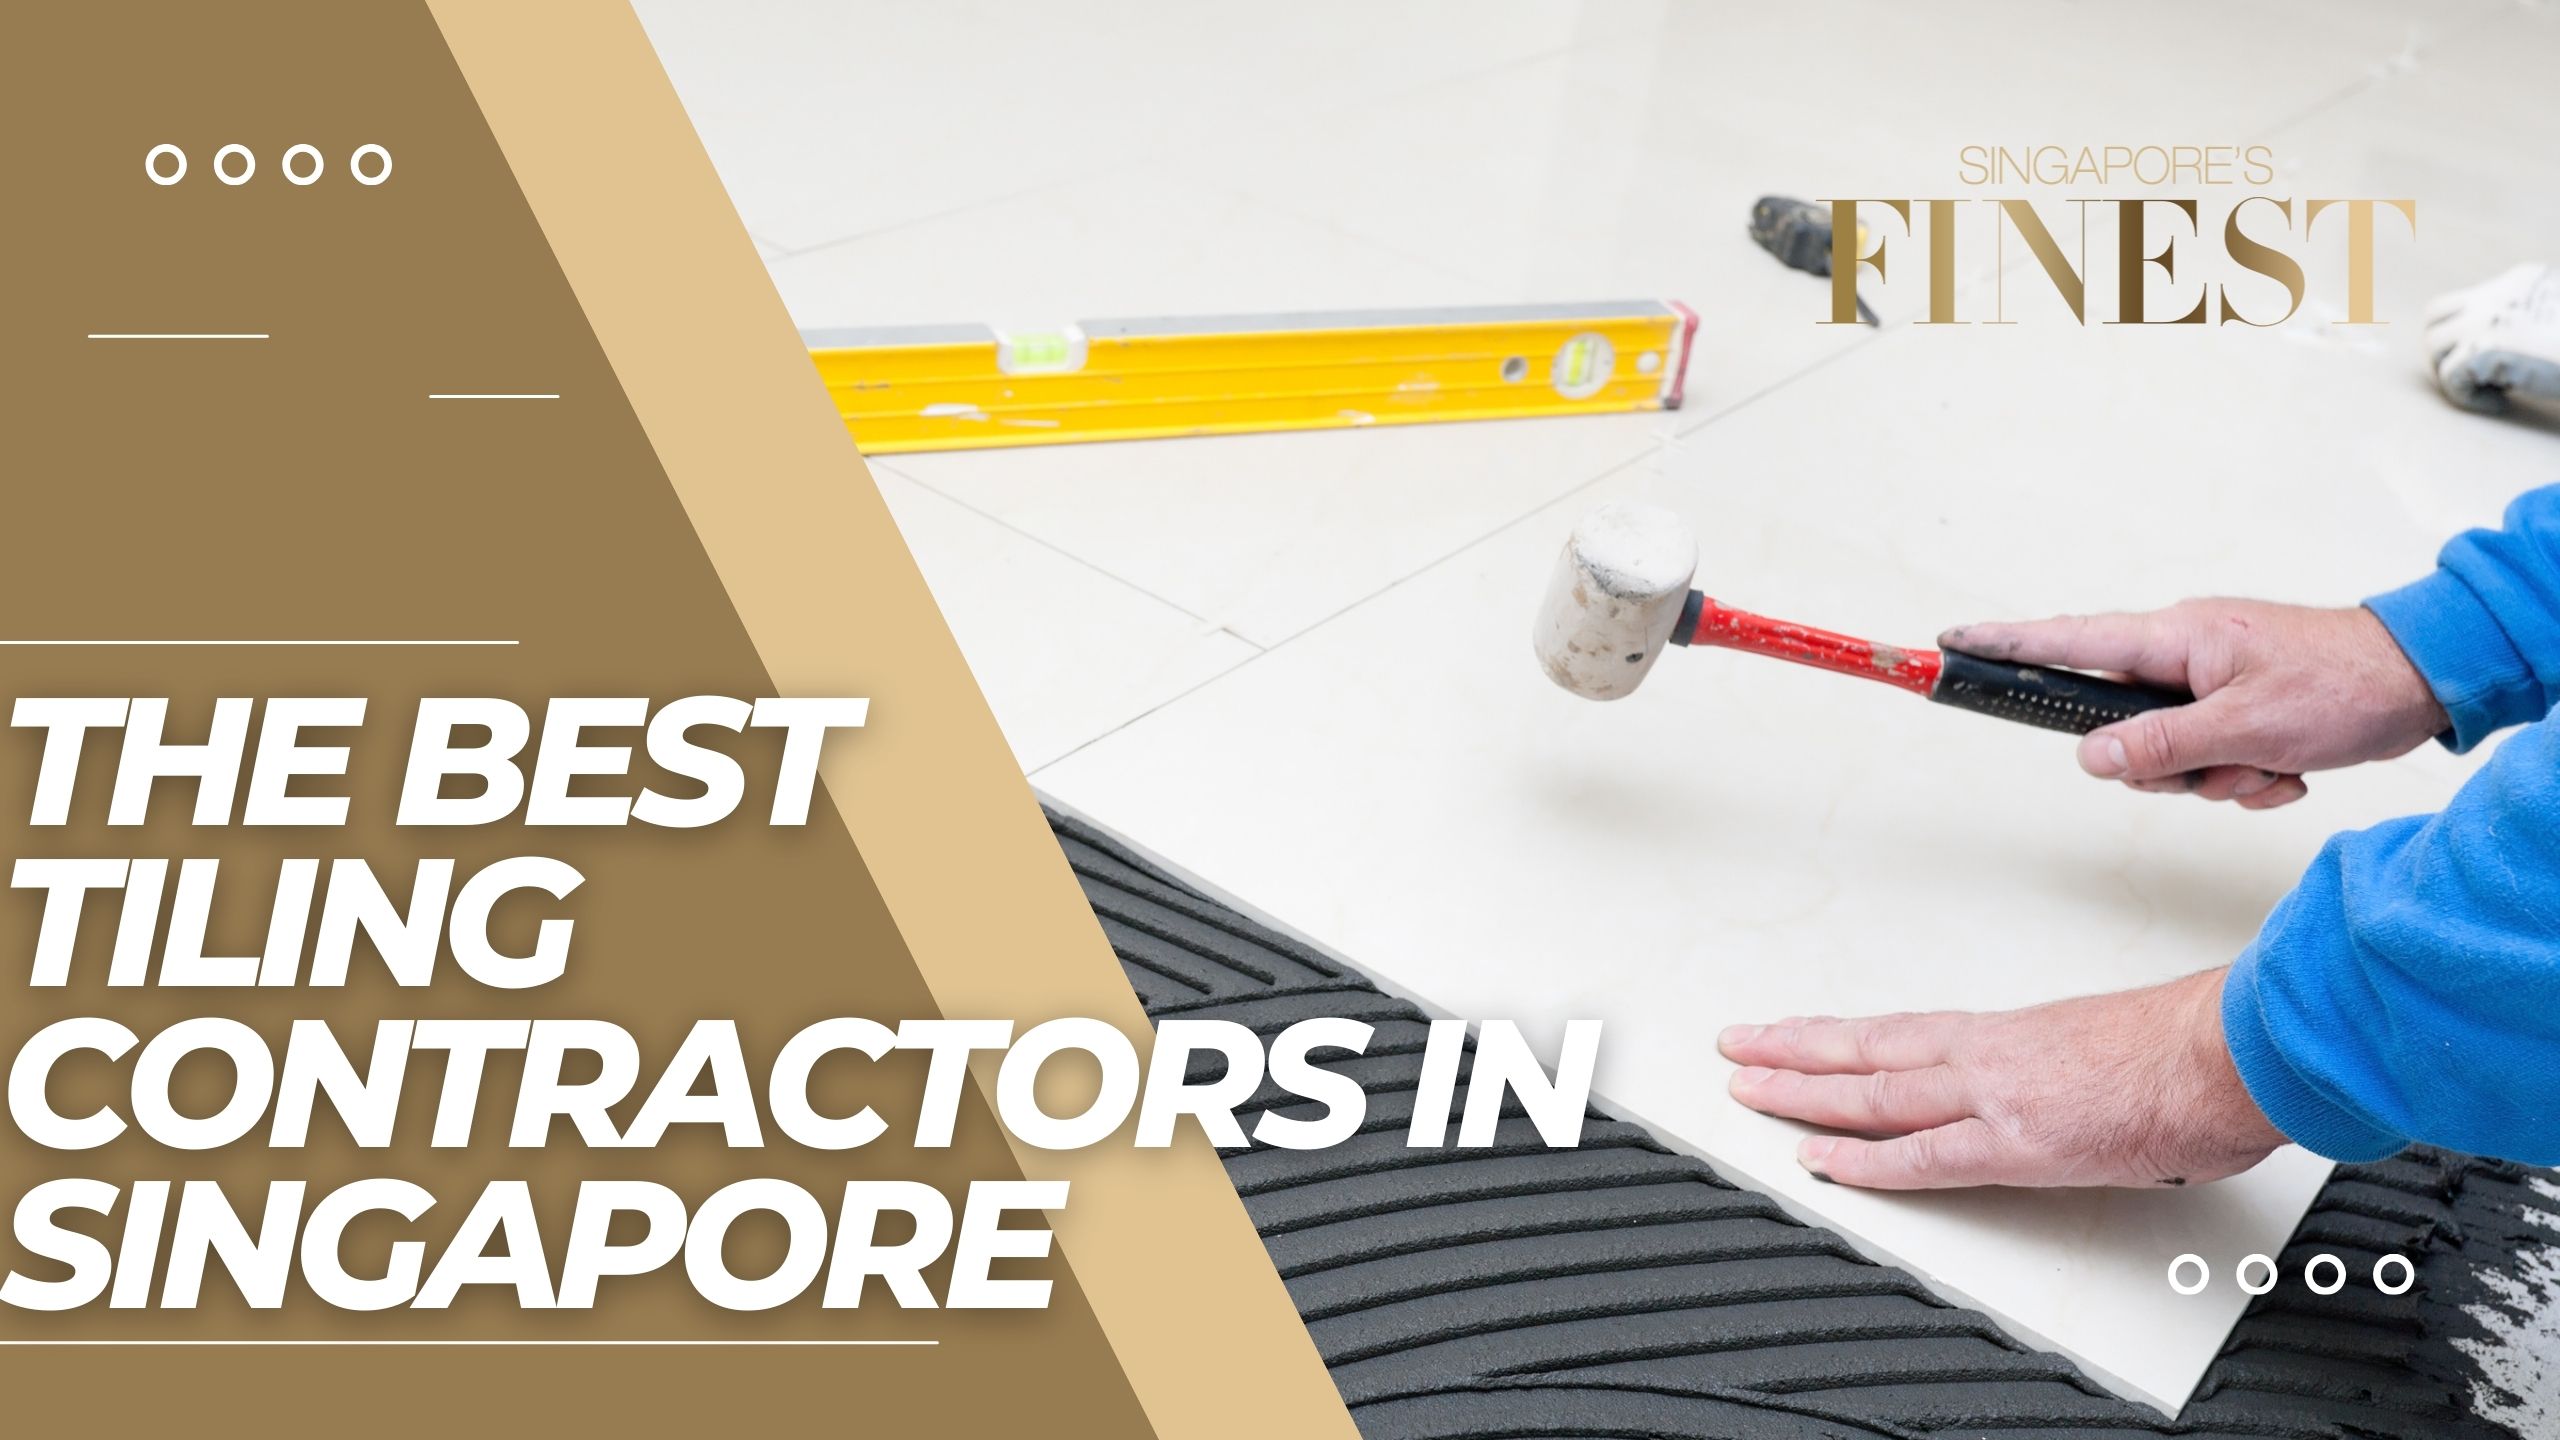 The Finest Tiling Contractors in Singapore